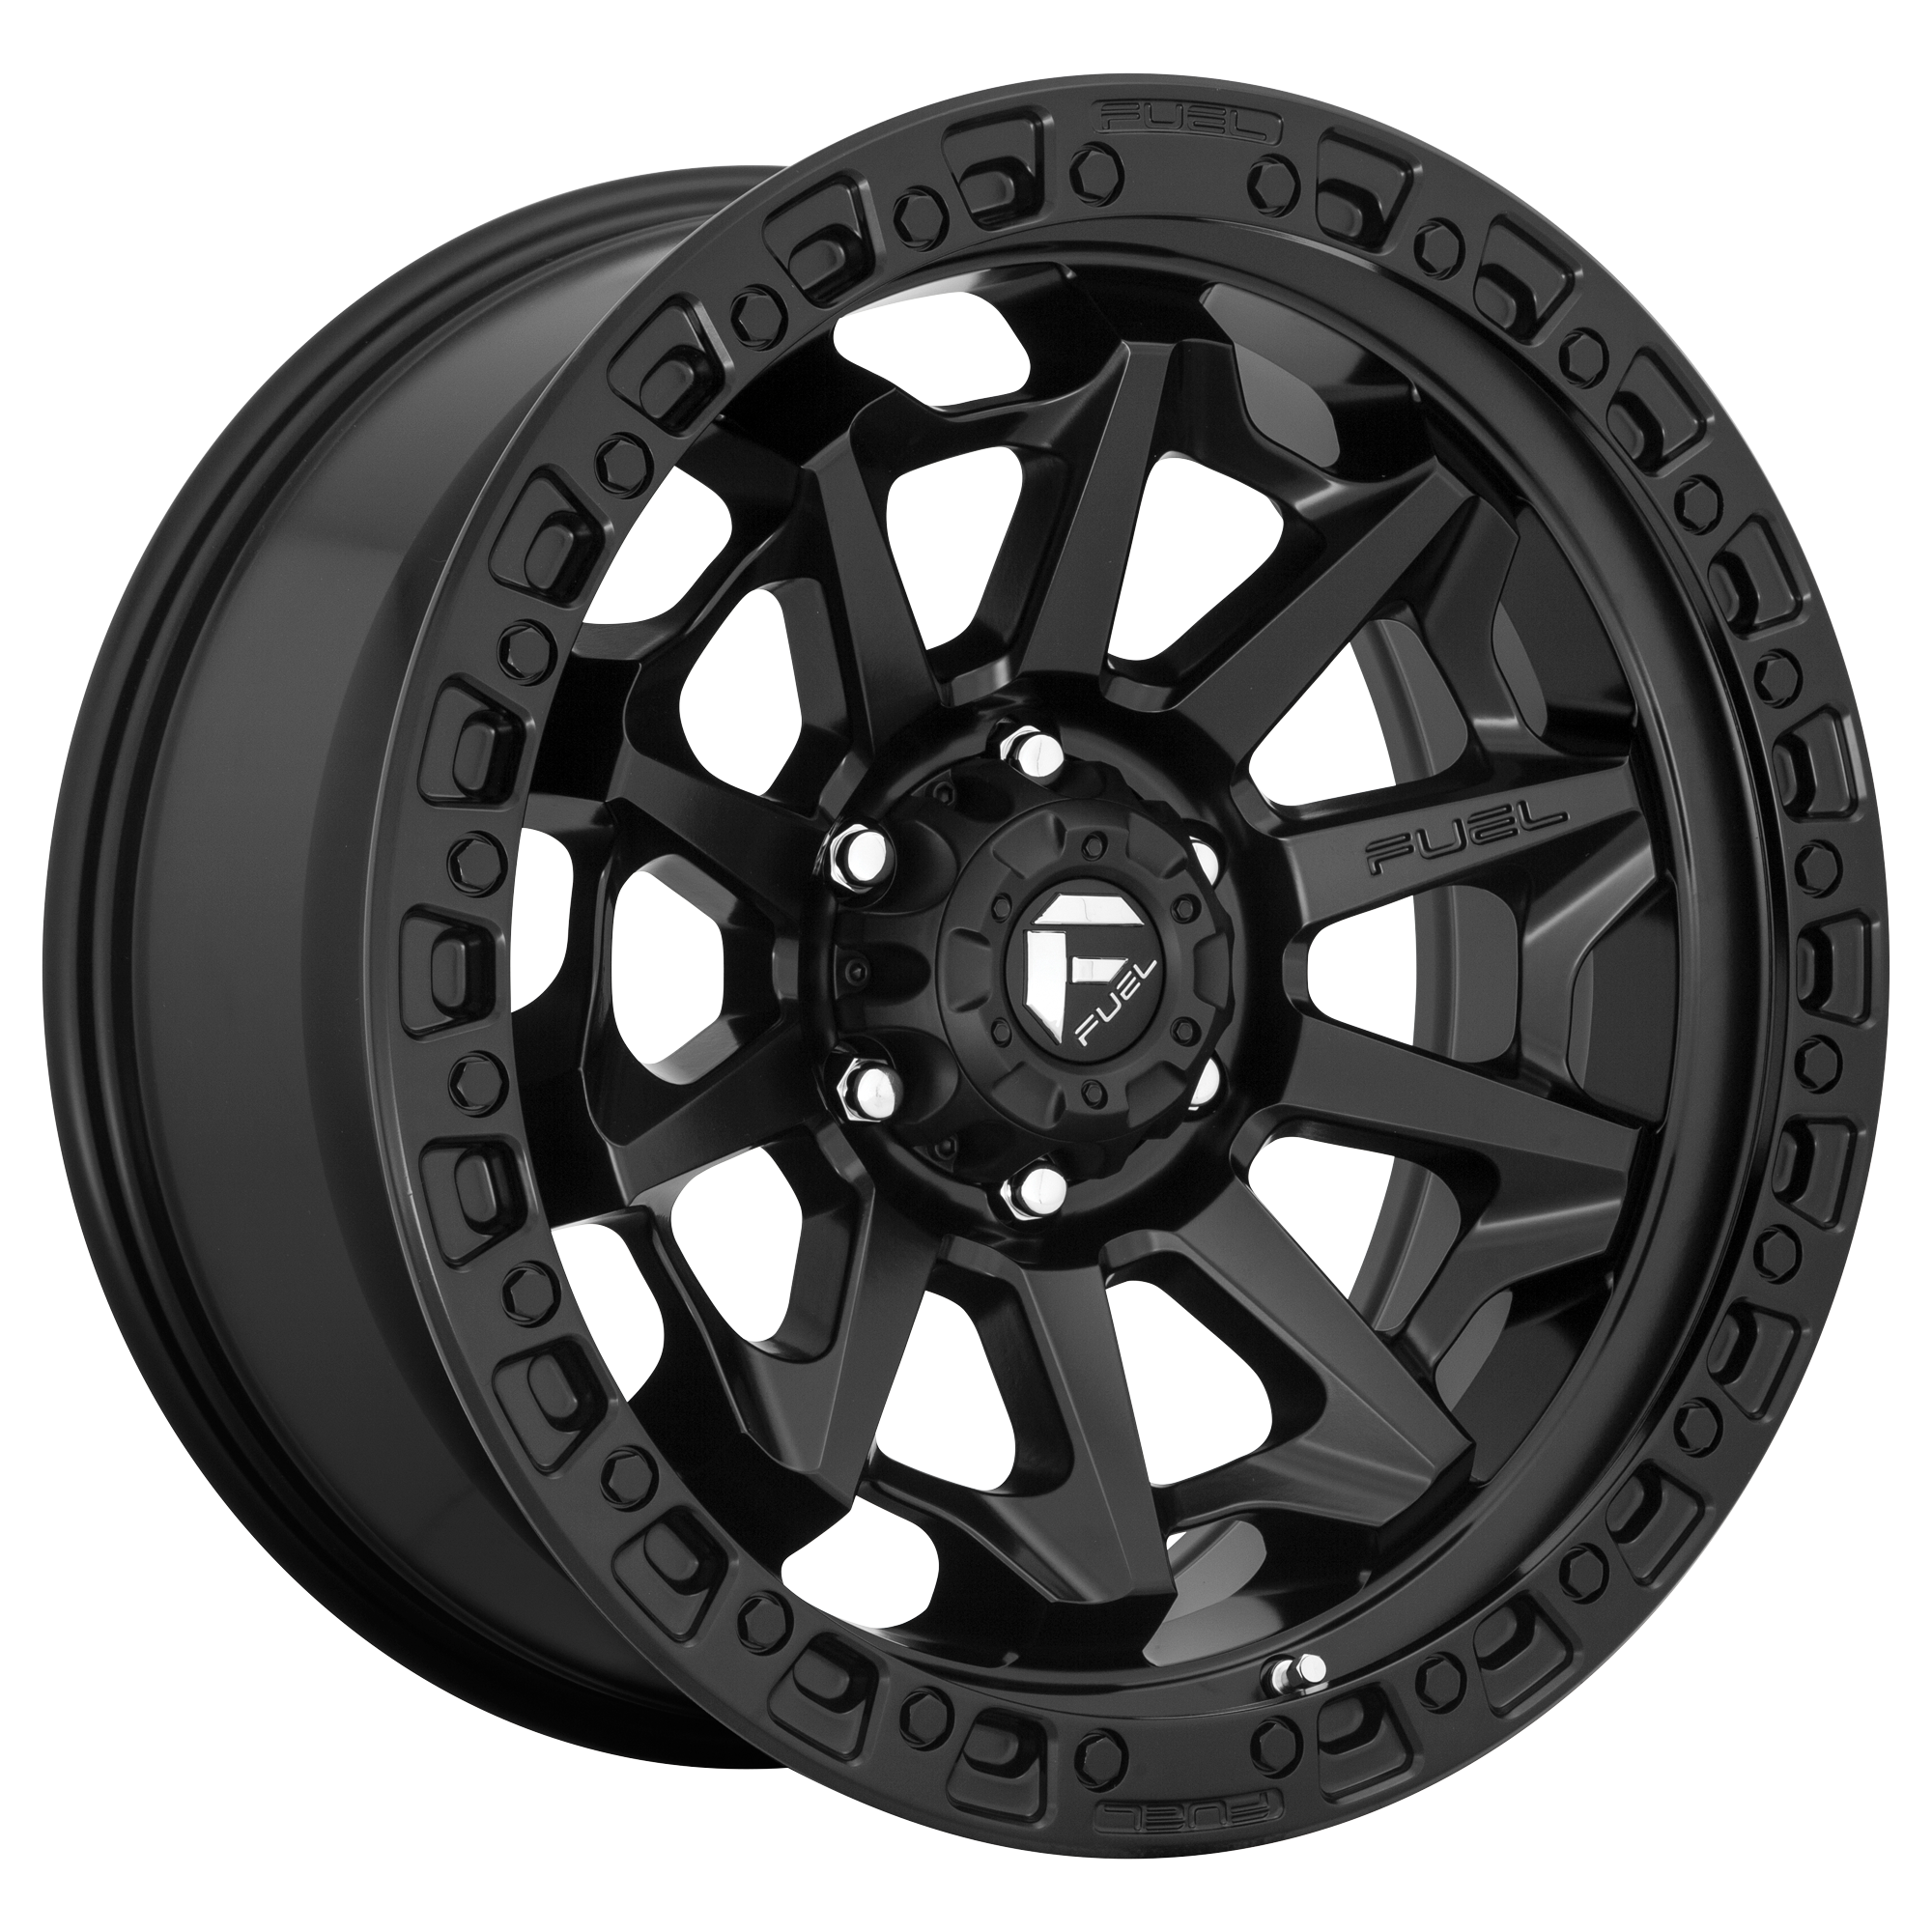 COVERT 20x9 5x127.00 MATTE BLACK (1 mm) - Tires and Engine Performance